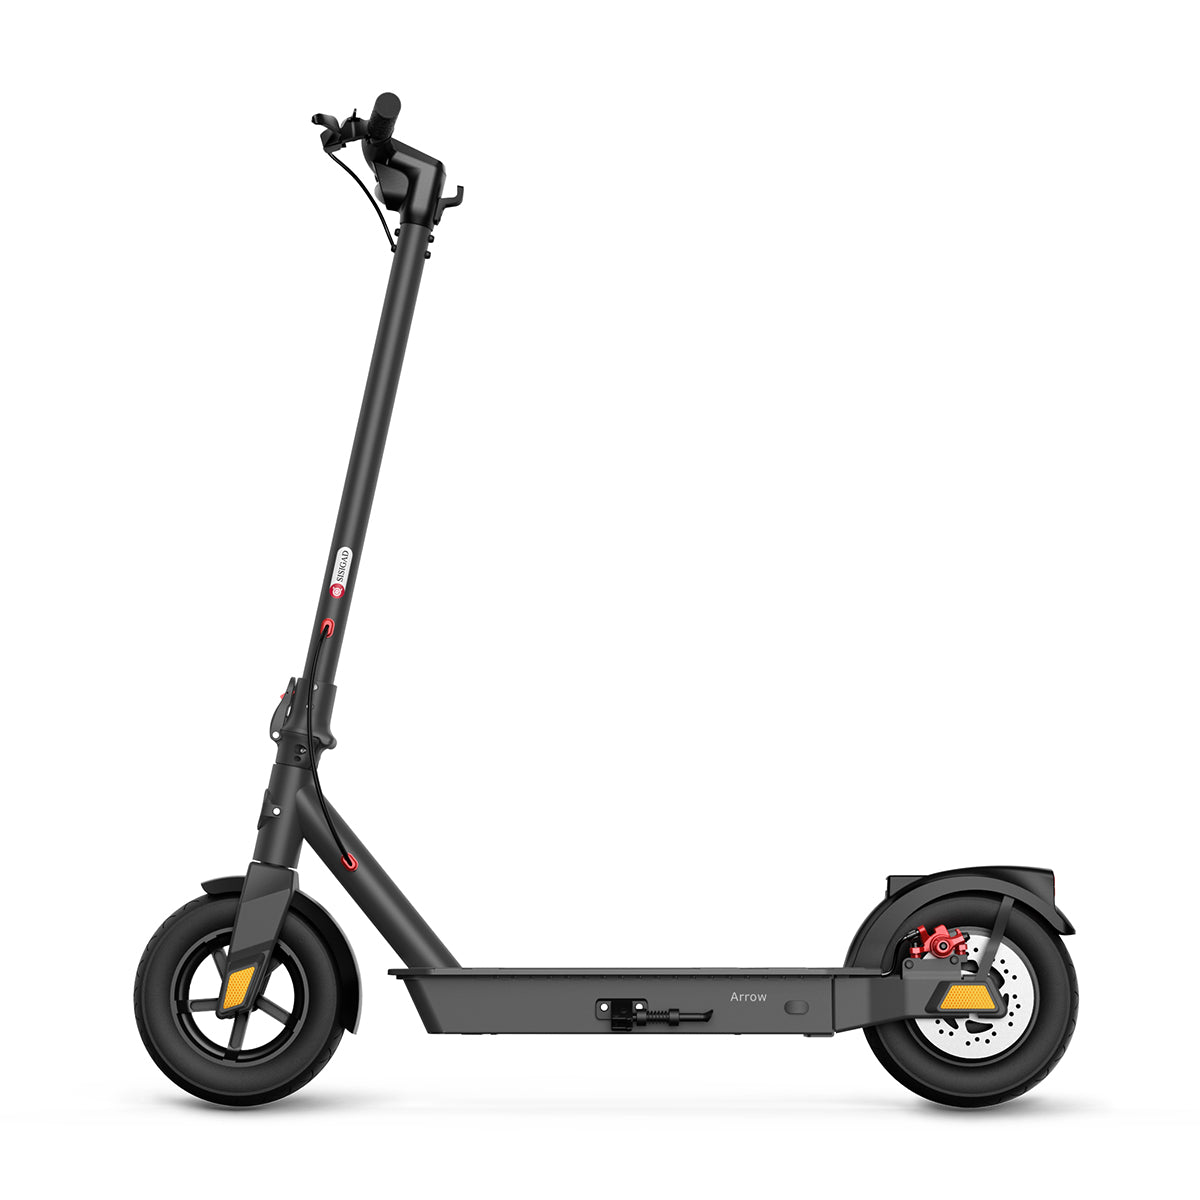 SISIGAD Arrow 10" Fat Tires Electric Scooter - SISIGAD